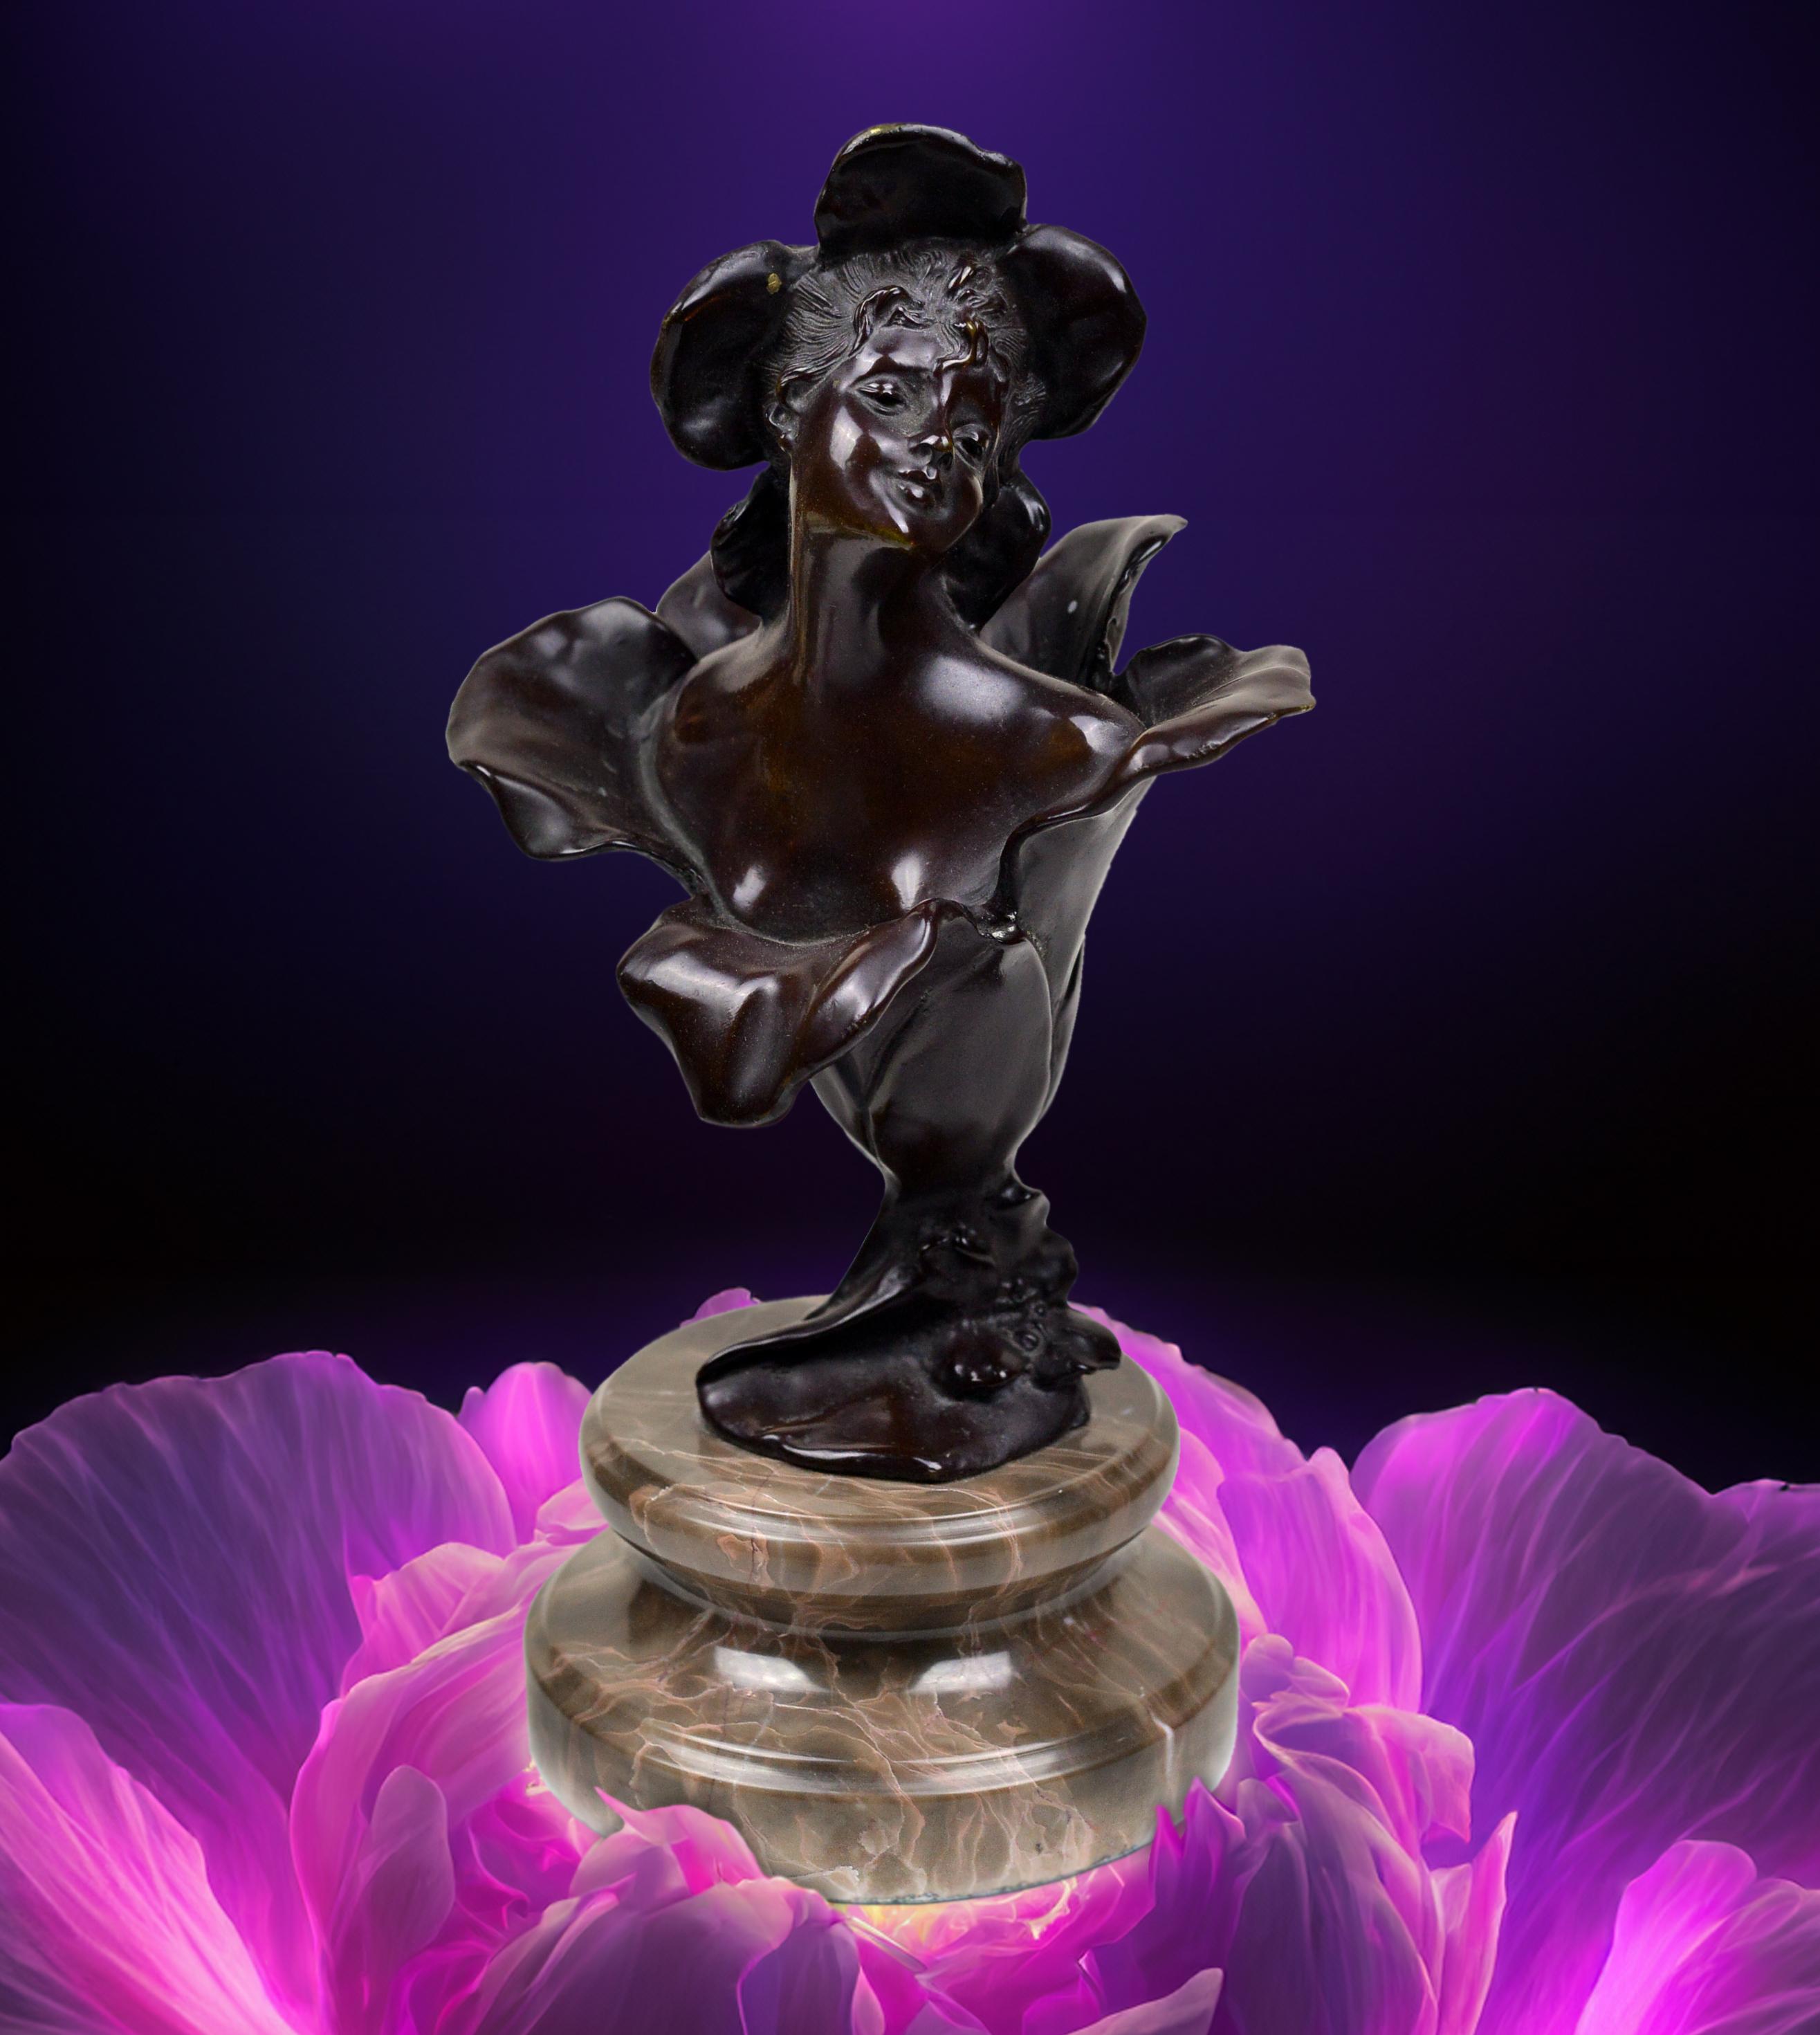 Wonderful bronze sculpture of Thumbelina from the fairy tale of the world Danish author Hans Christian Andersen. Very fine cast bronze figure of the late 19th century in the Art Nouveau style. The sculptor did not approach this work in a trivial